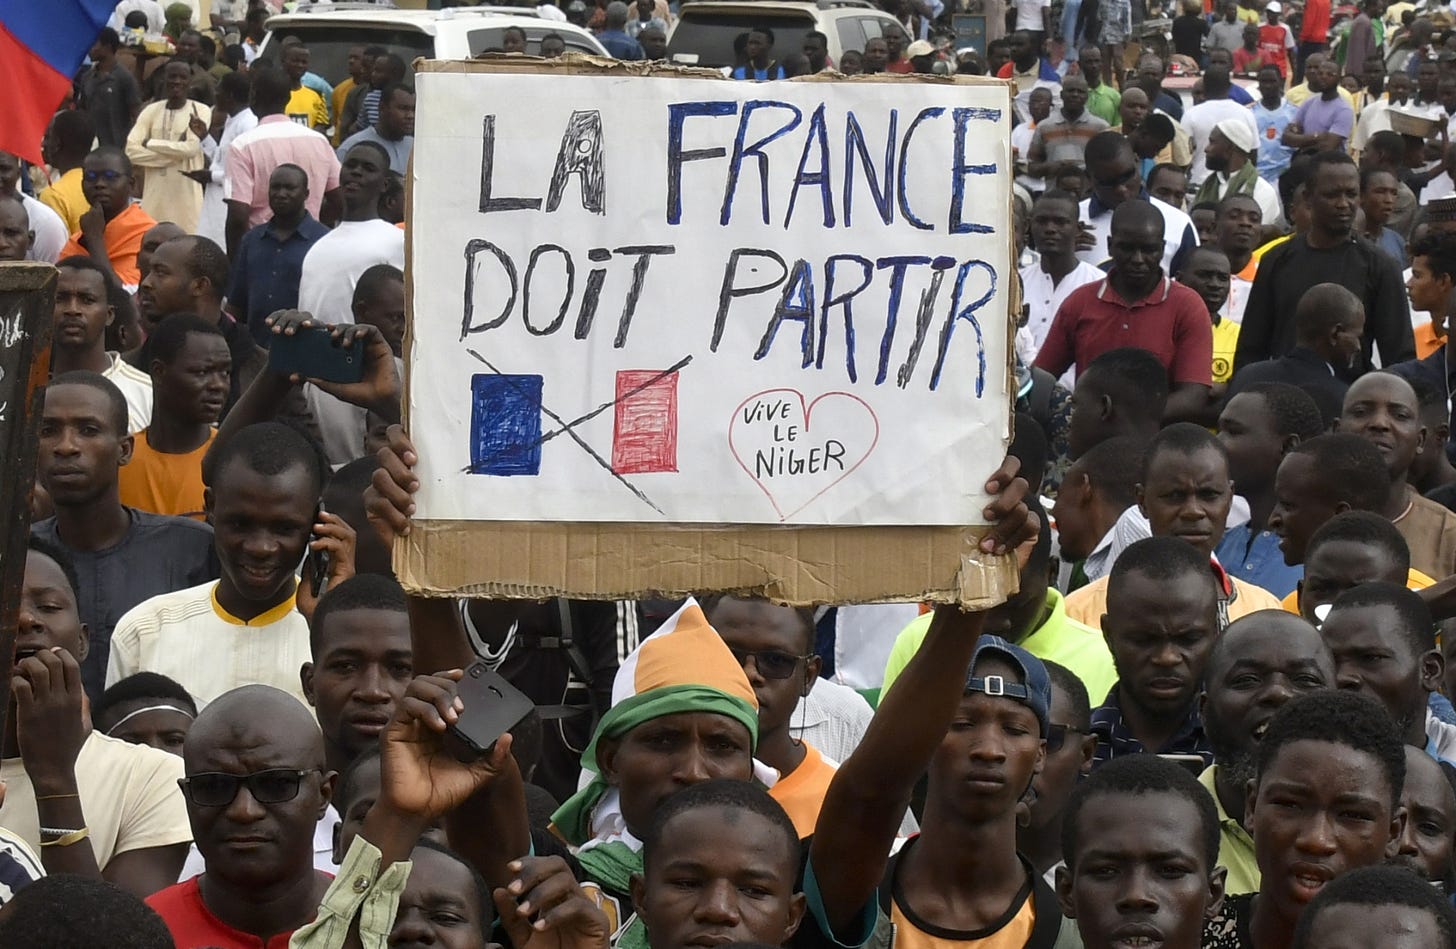 They really don’t like France in Niger.